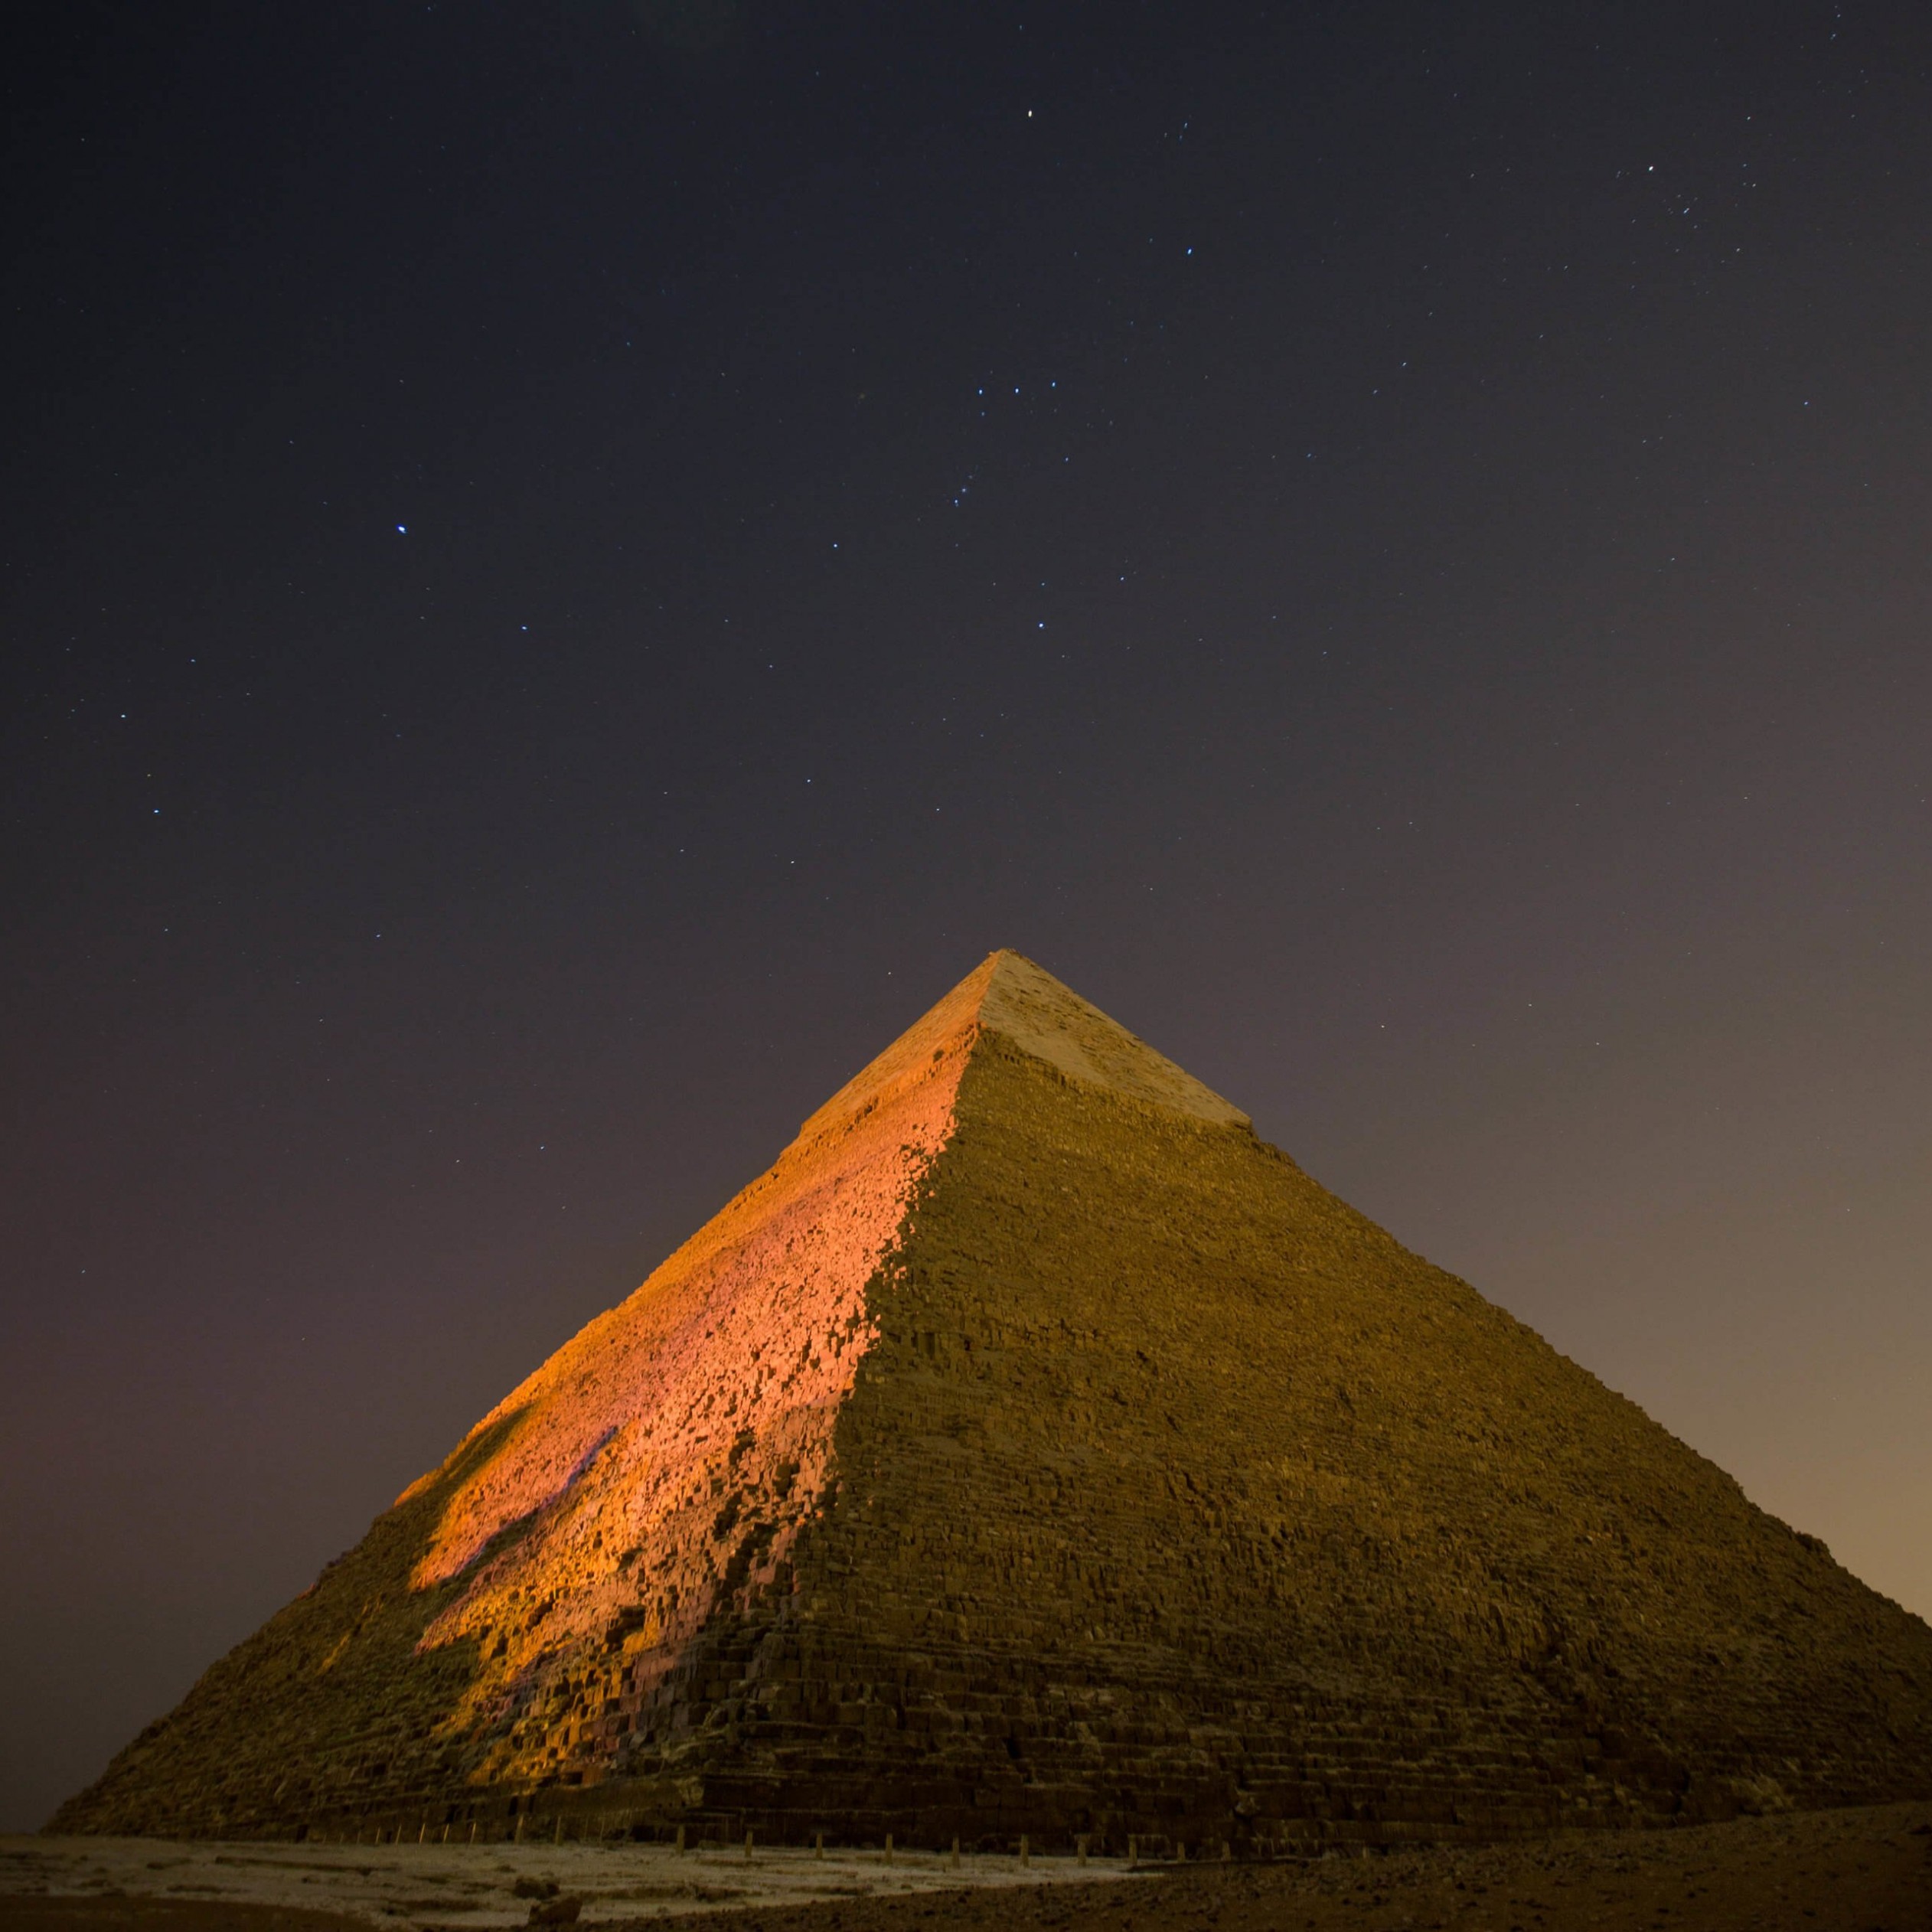 Pyramid by Night Wallpaper for Apple iPad Air